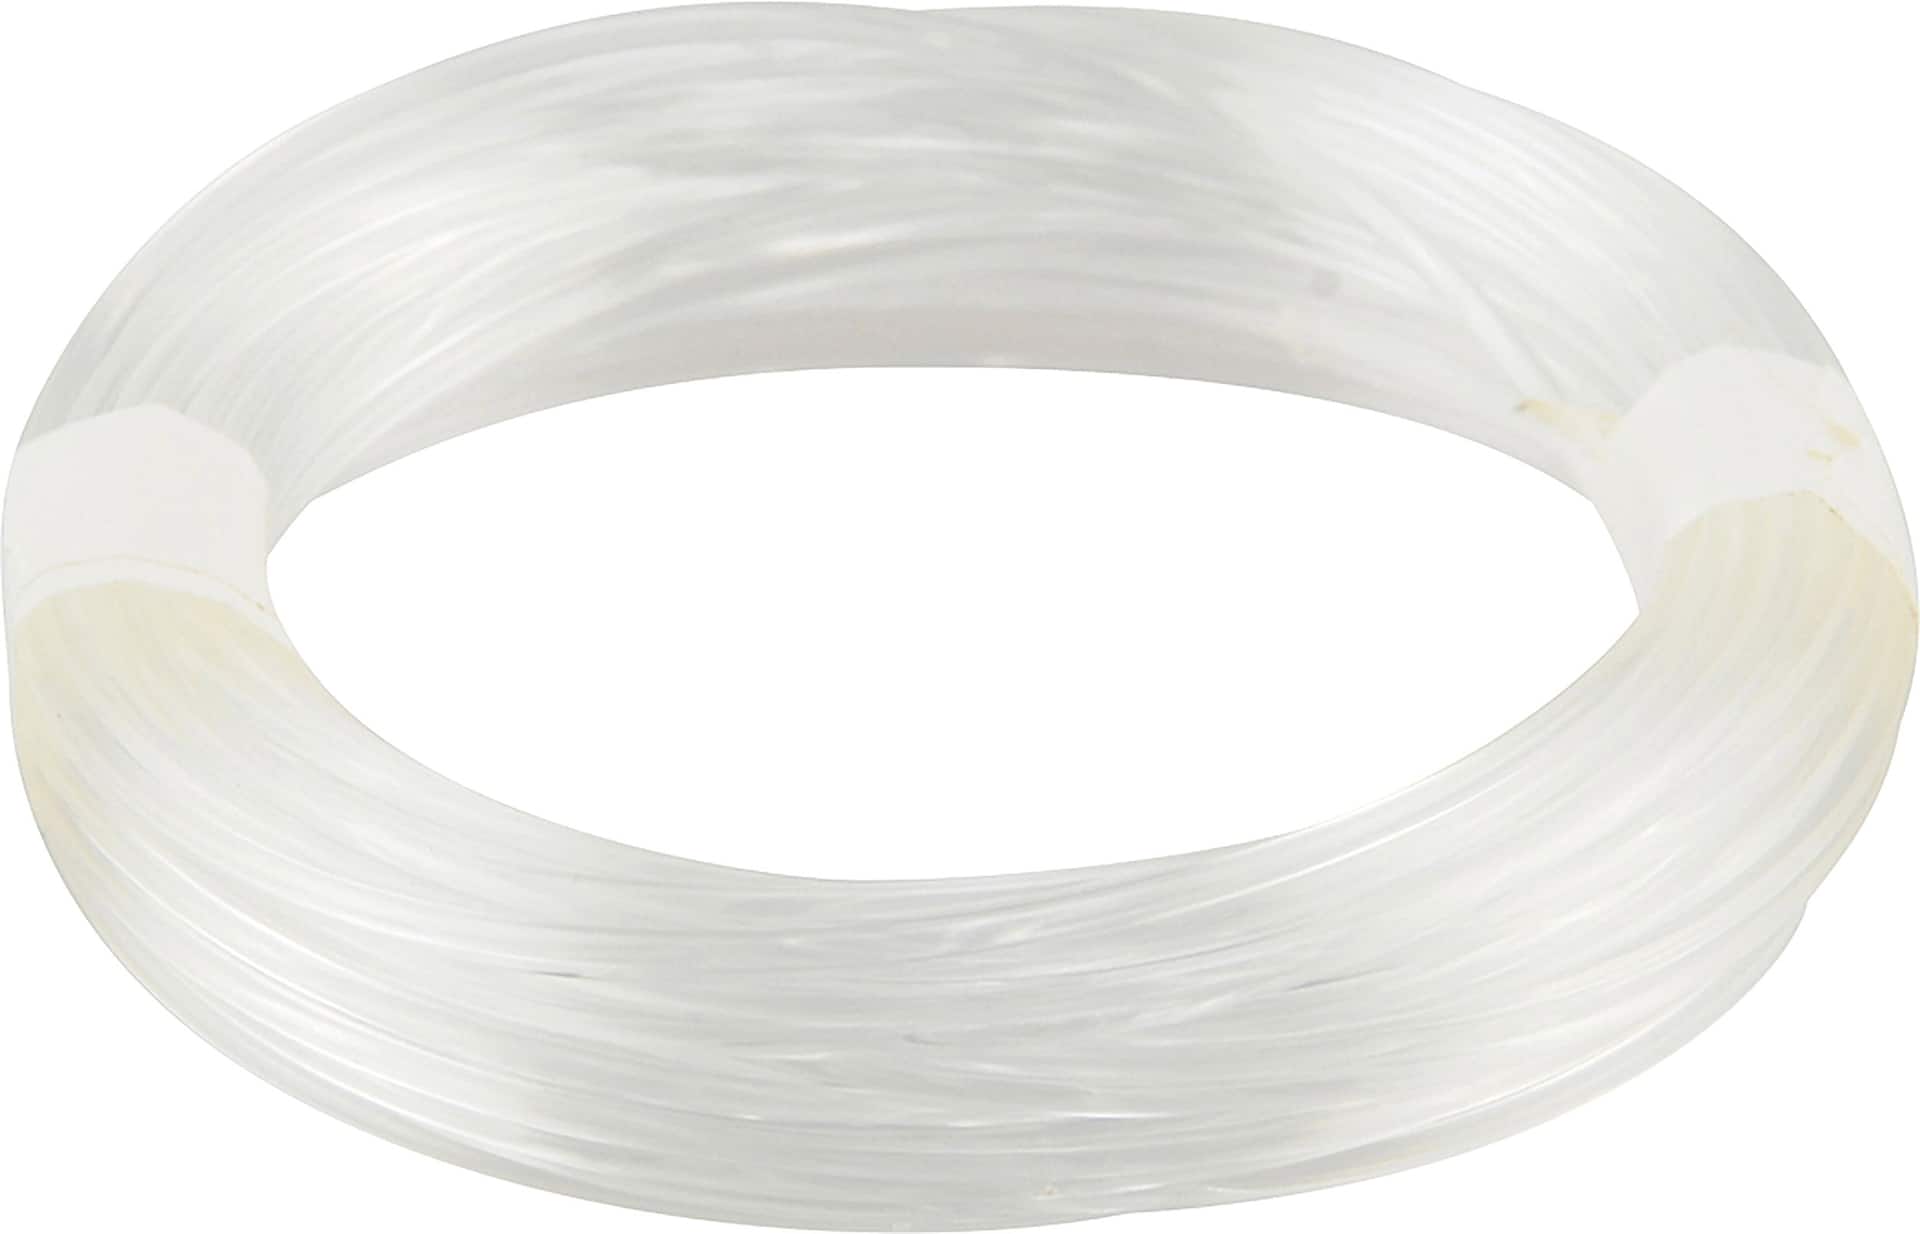 Hillman Invisible Wire, So-ft and Flexible, 50-lb Capacity, 15-ft